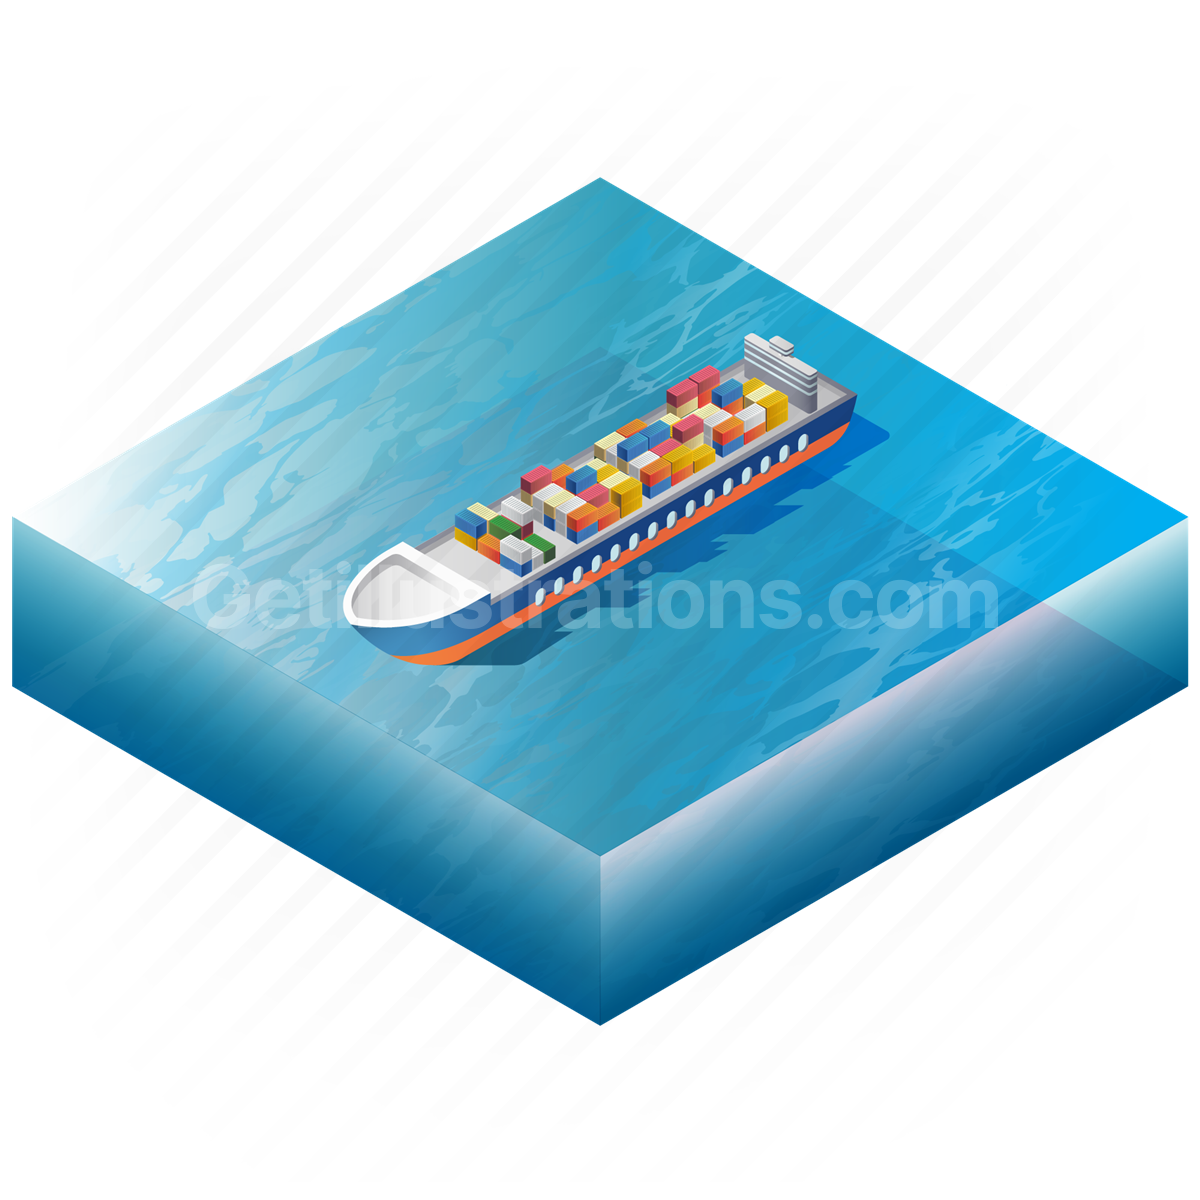 delivery, cargo ship, ship, transport, vehicle